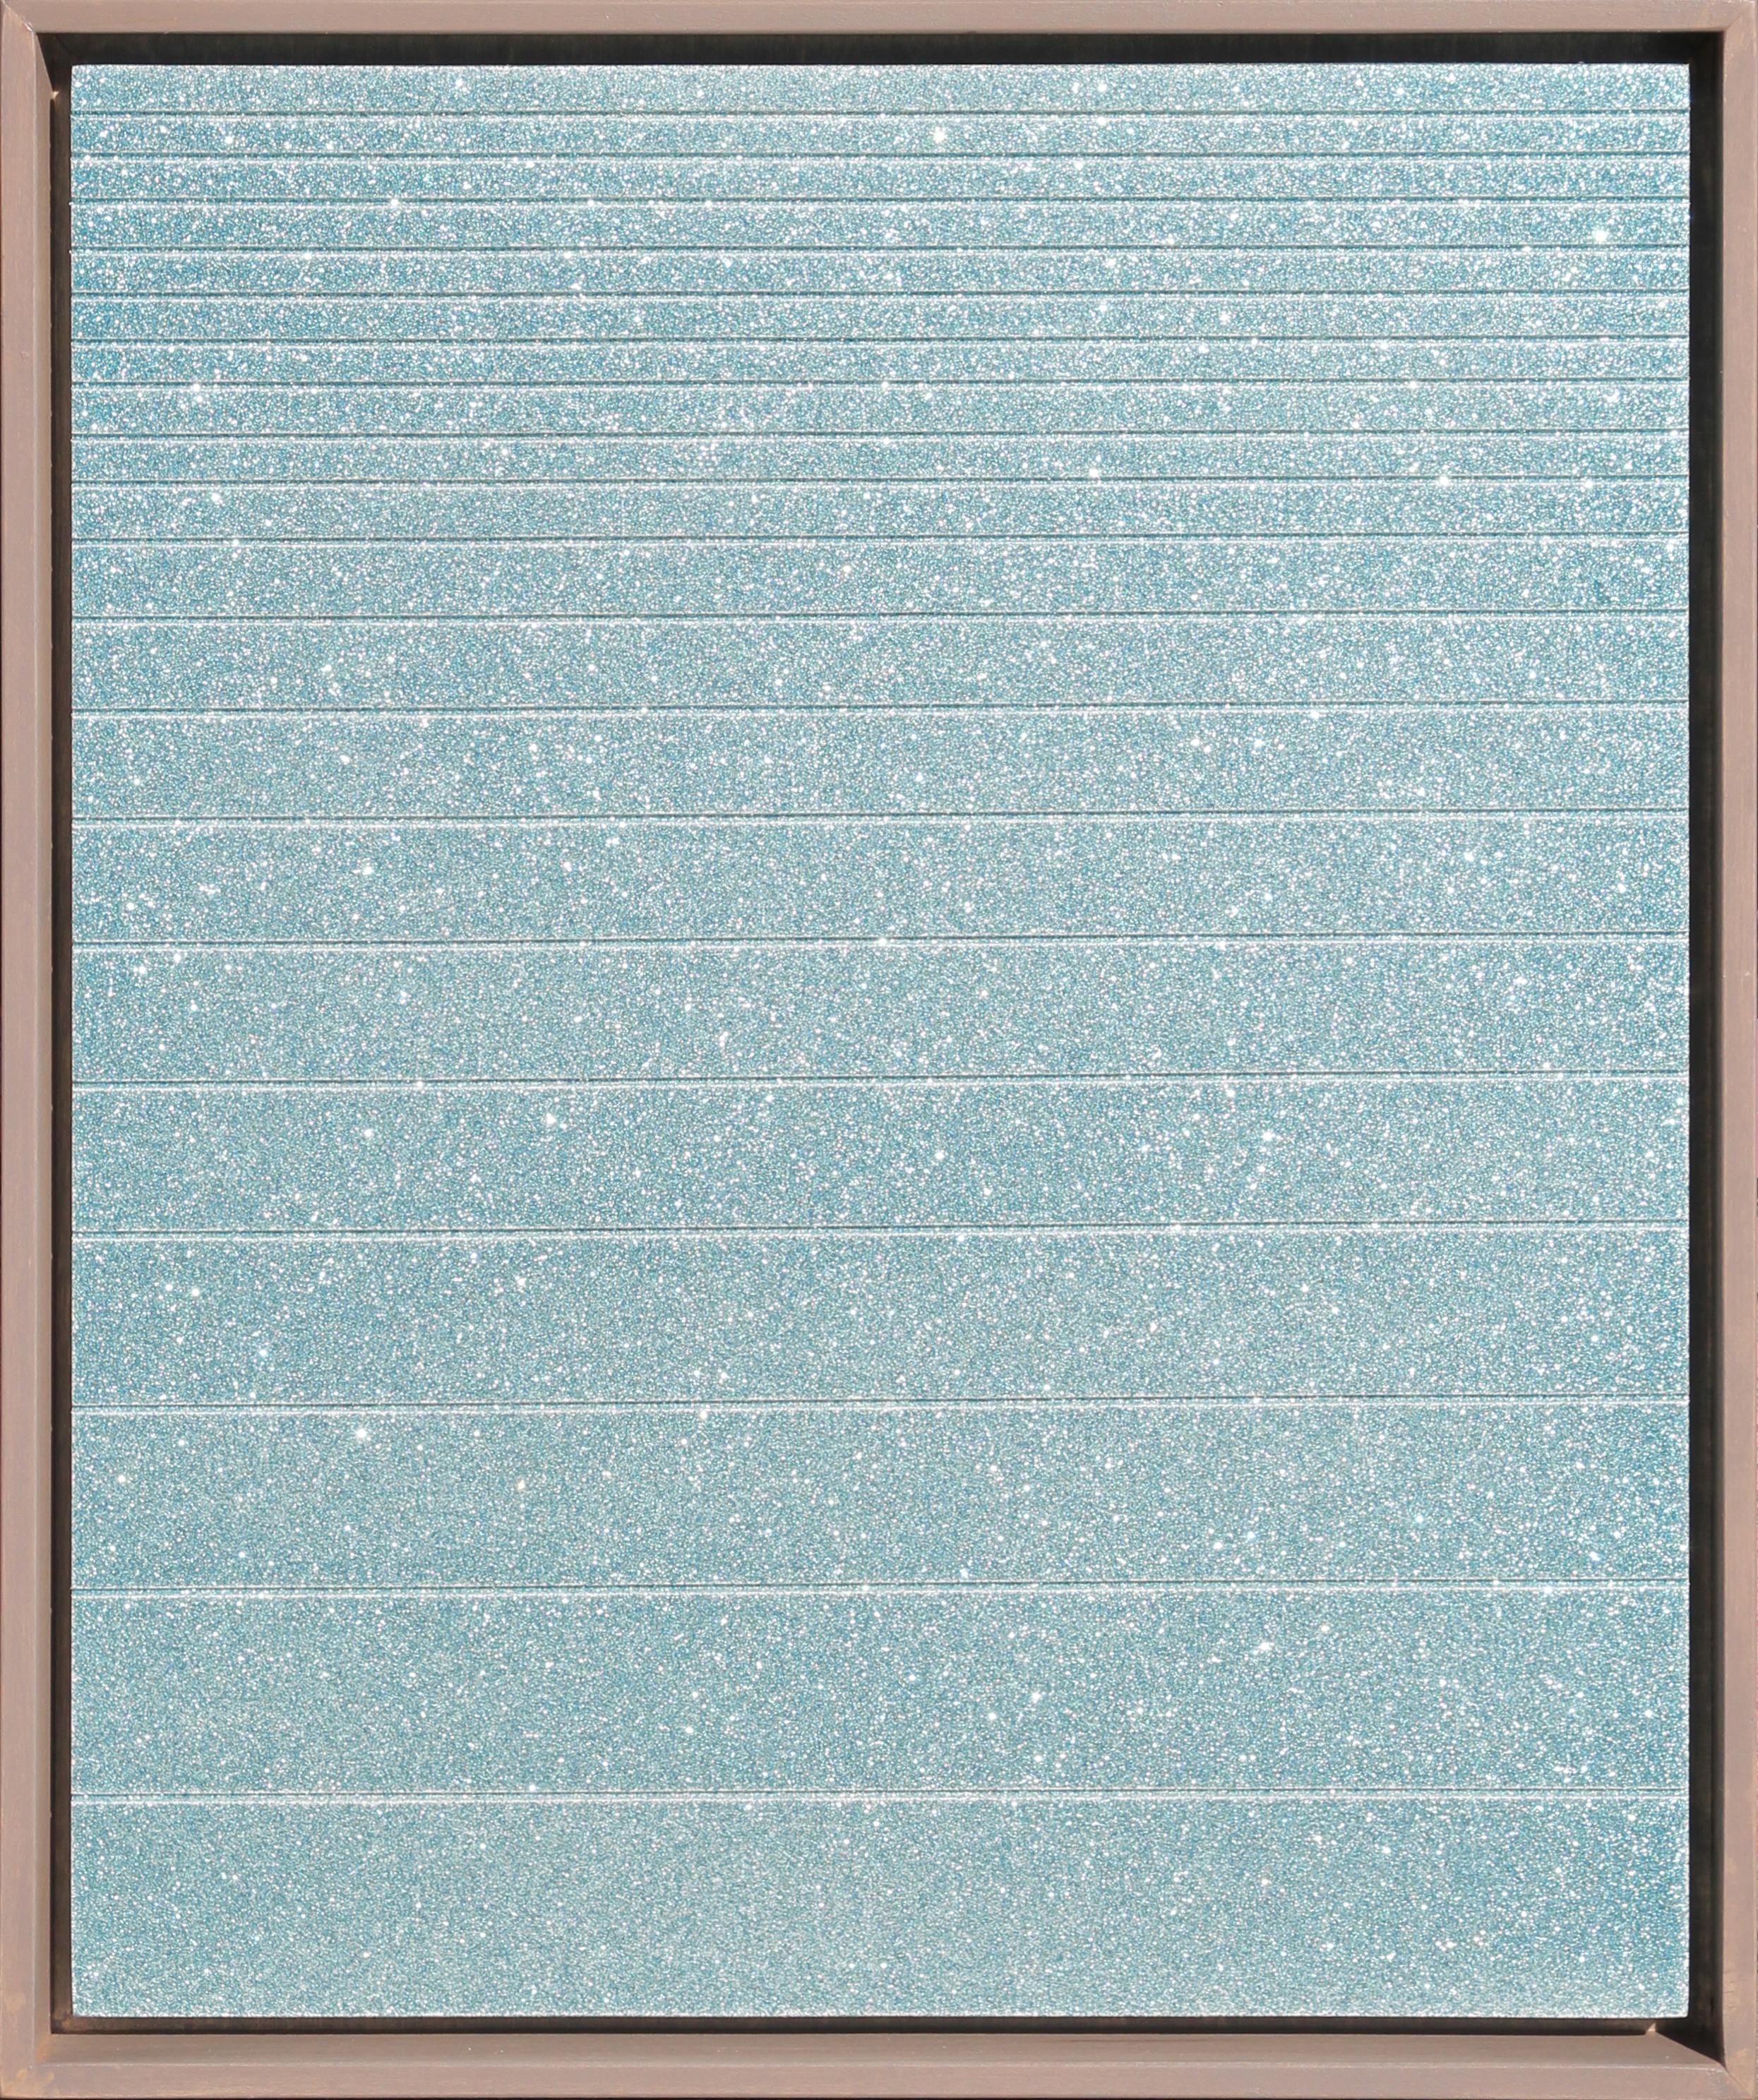 Matthew Reeves Abstract Painting - "Ebb Tide - Galveston, TX" Contemporary Sky Blue Geometric Groove Painting